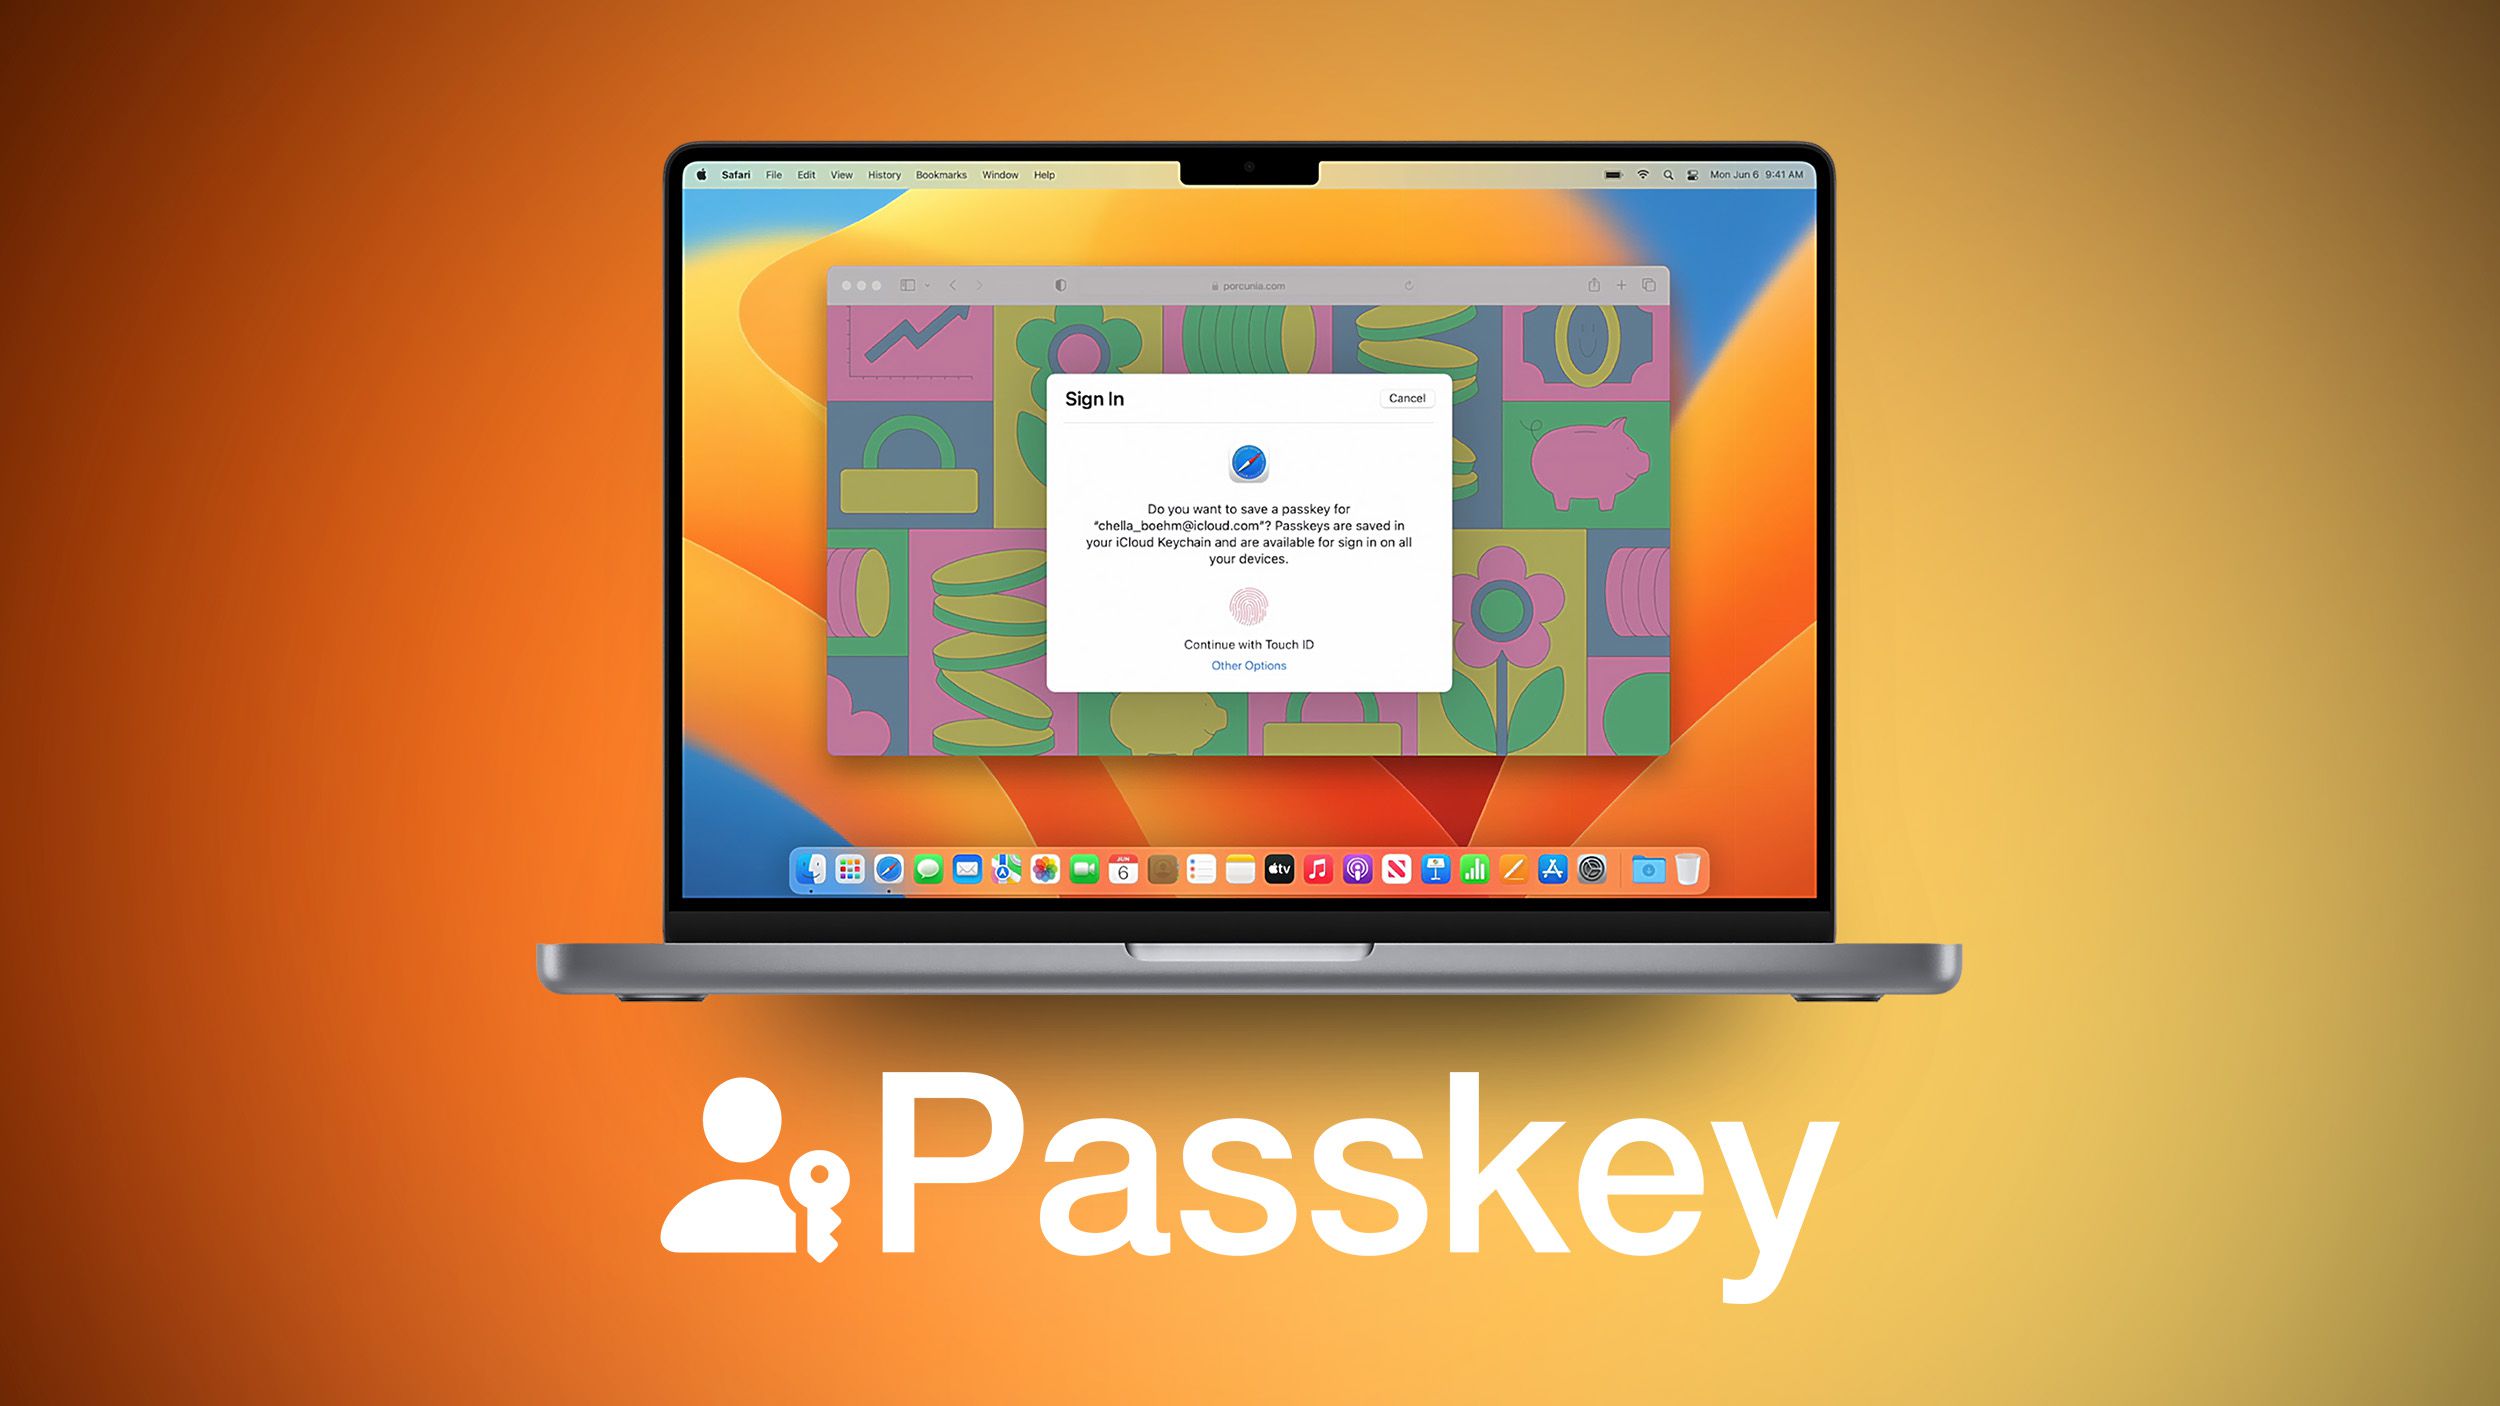 Apple Aiming to Replace Passwords With New Passkey Feature - MacRumors